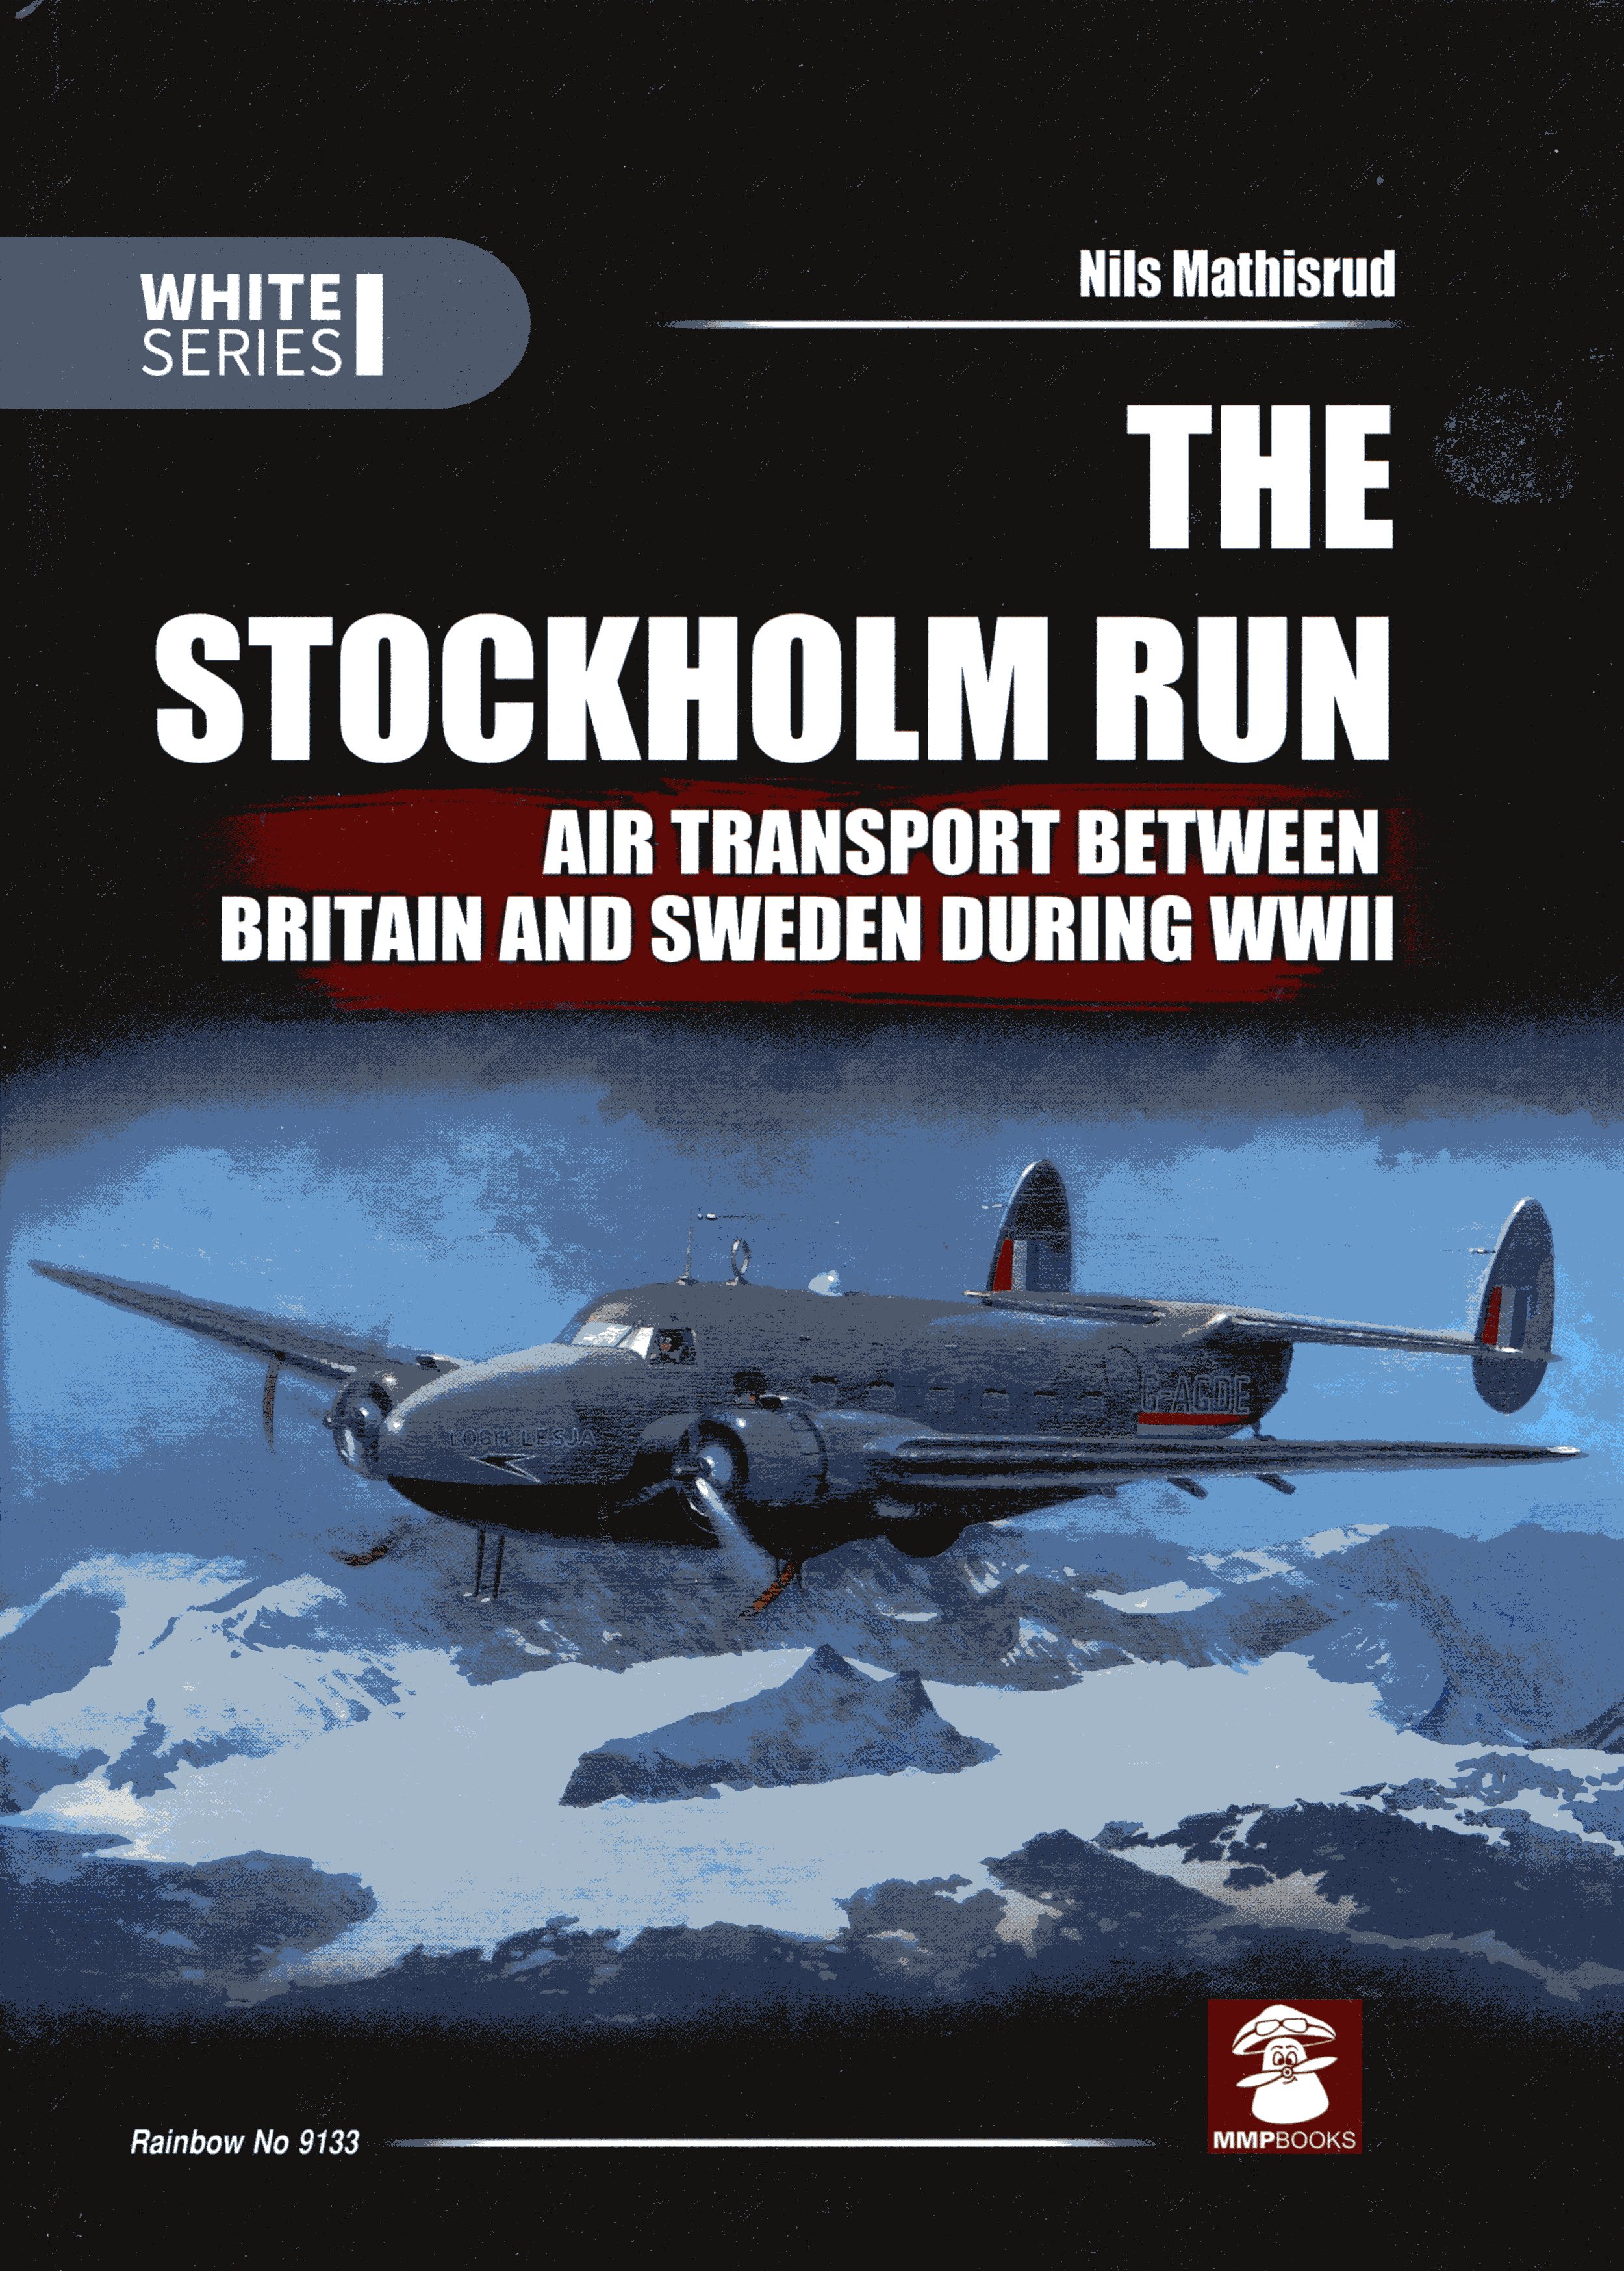 The Stockholm Run - Air transport between Britain and Sweden during WWII